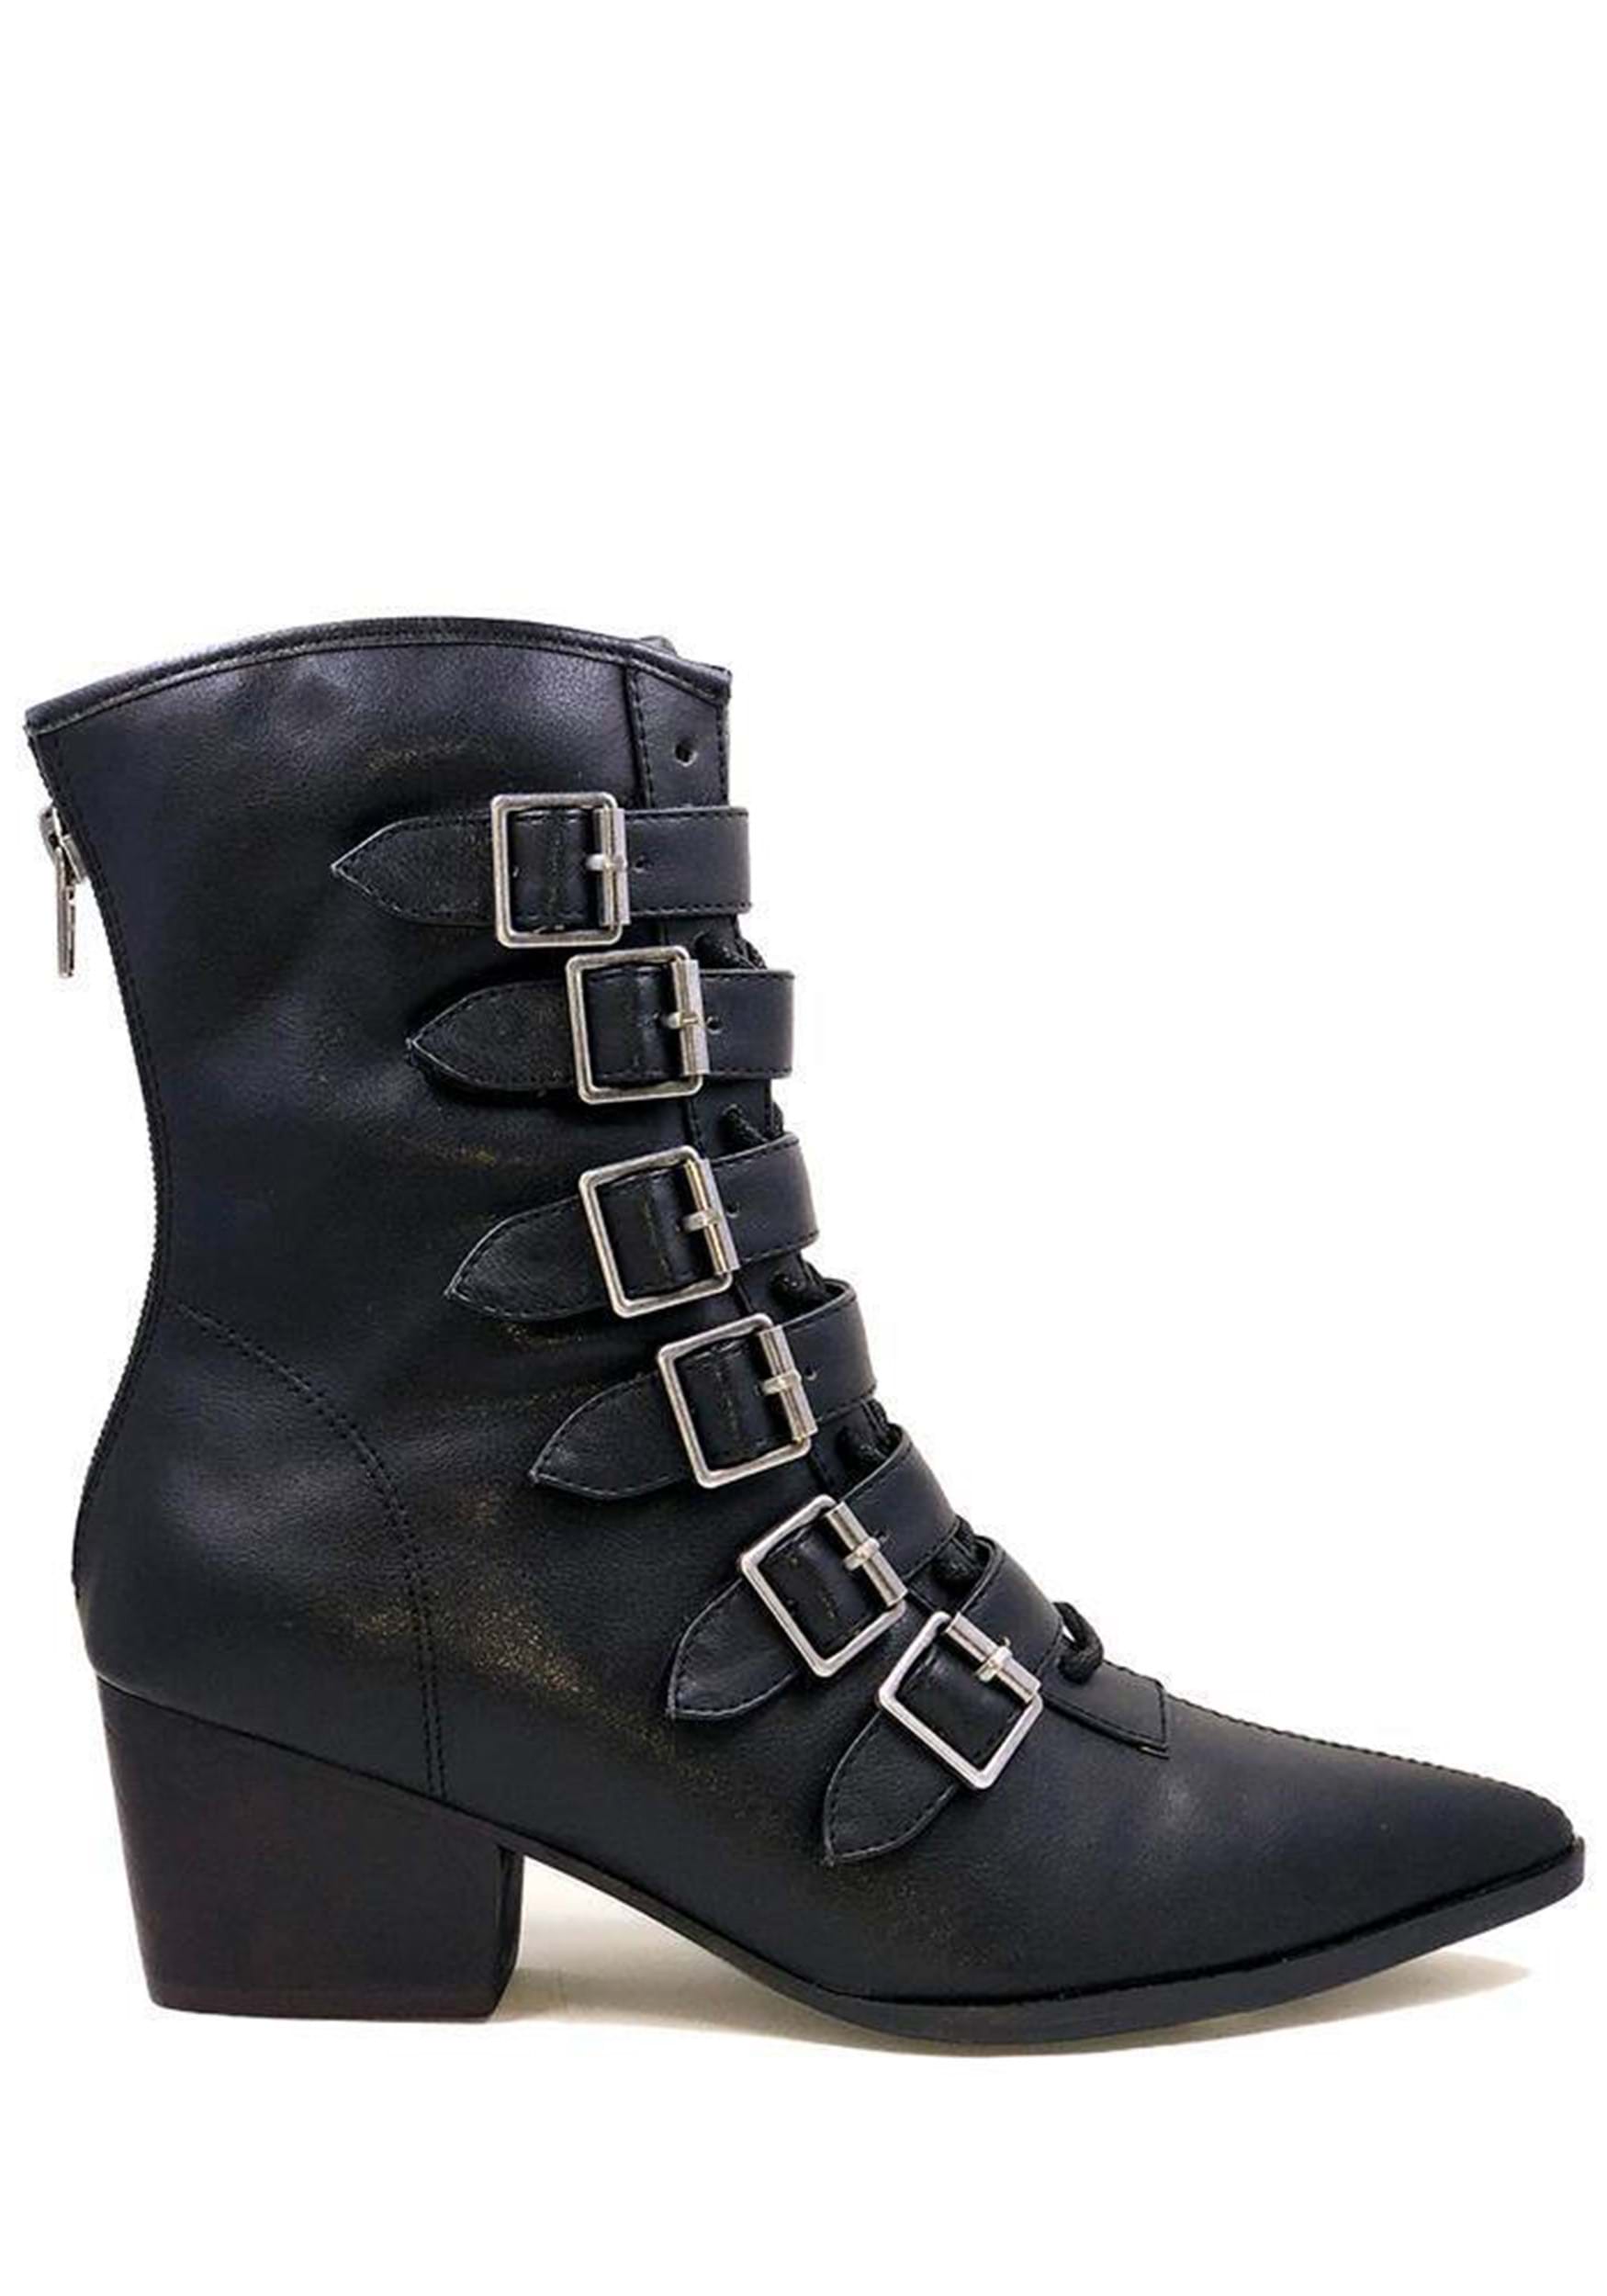 Black Buckle Boots for Women